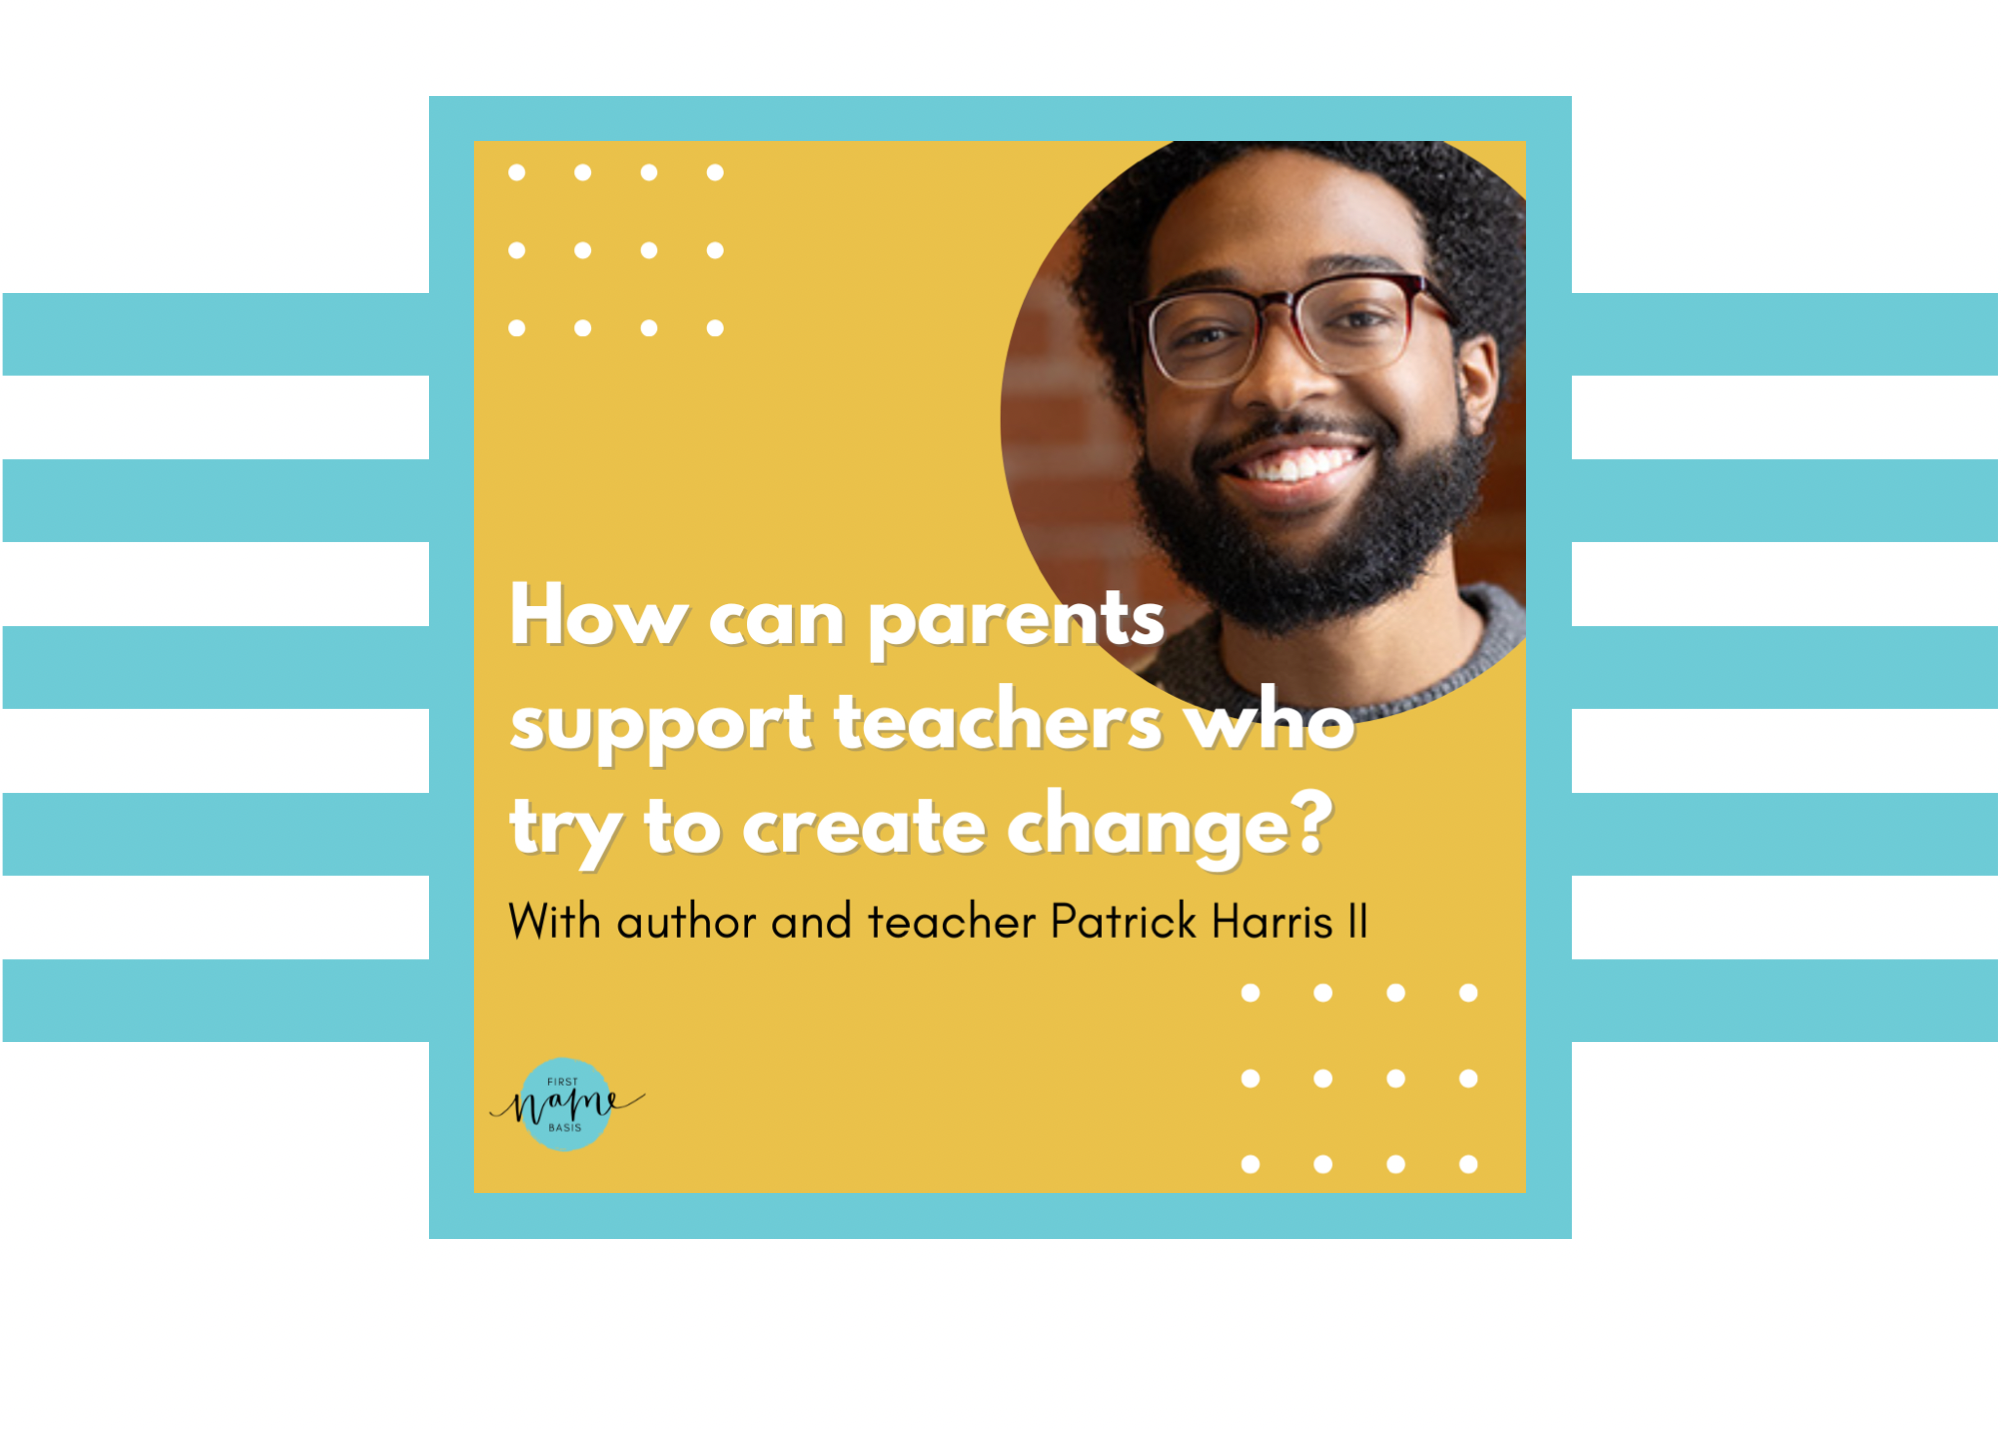 How Can Parents Support Teachers Who Try to Create Change?